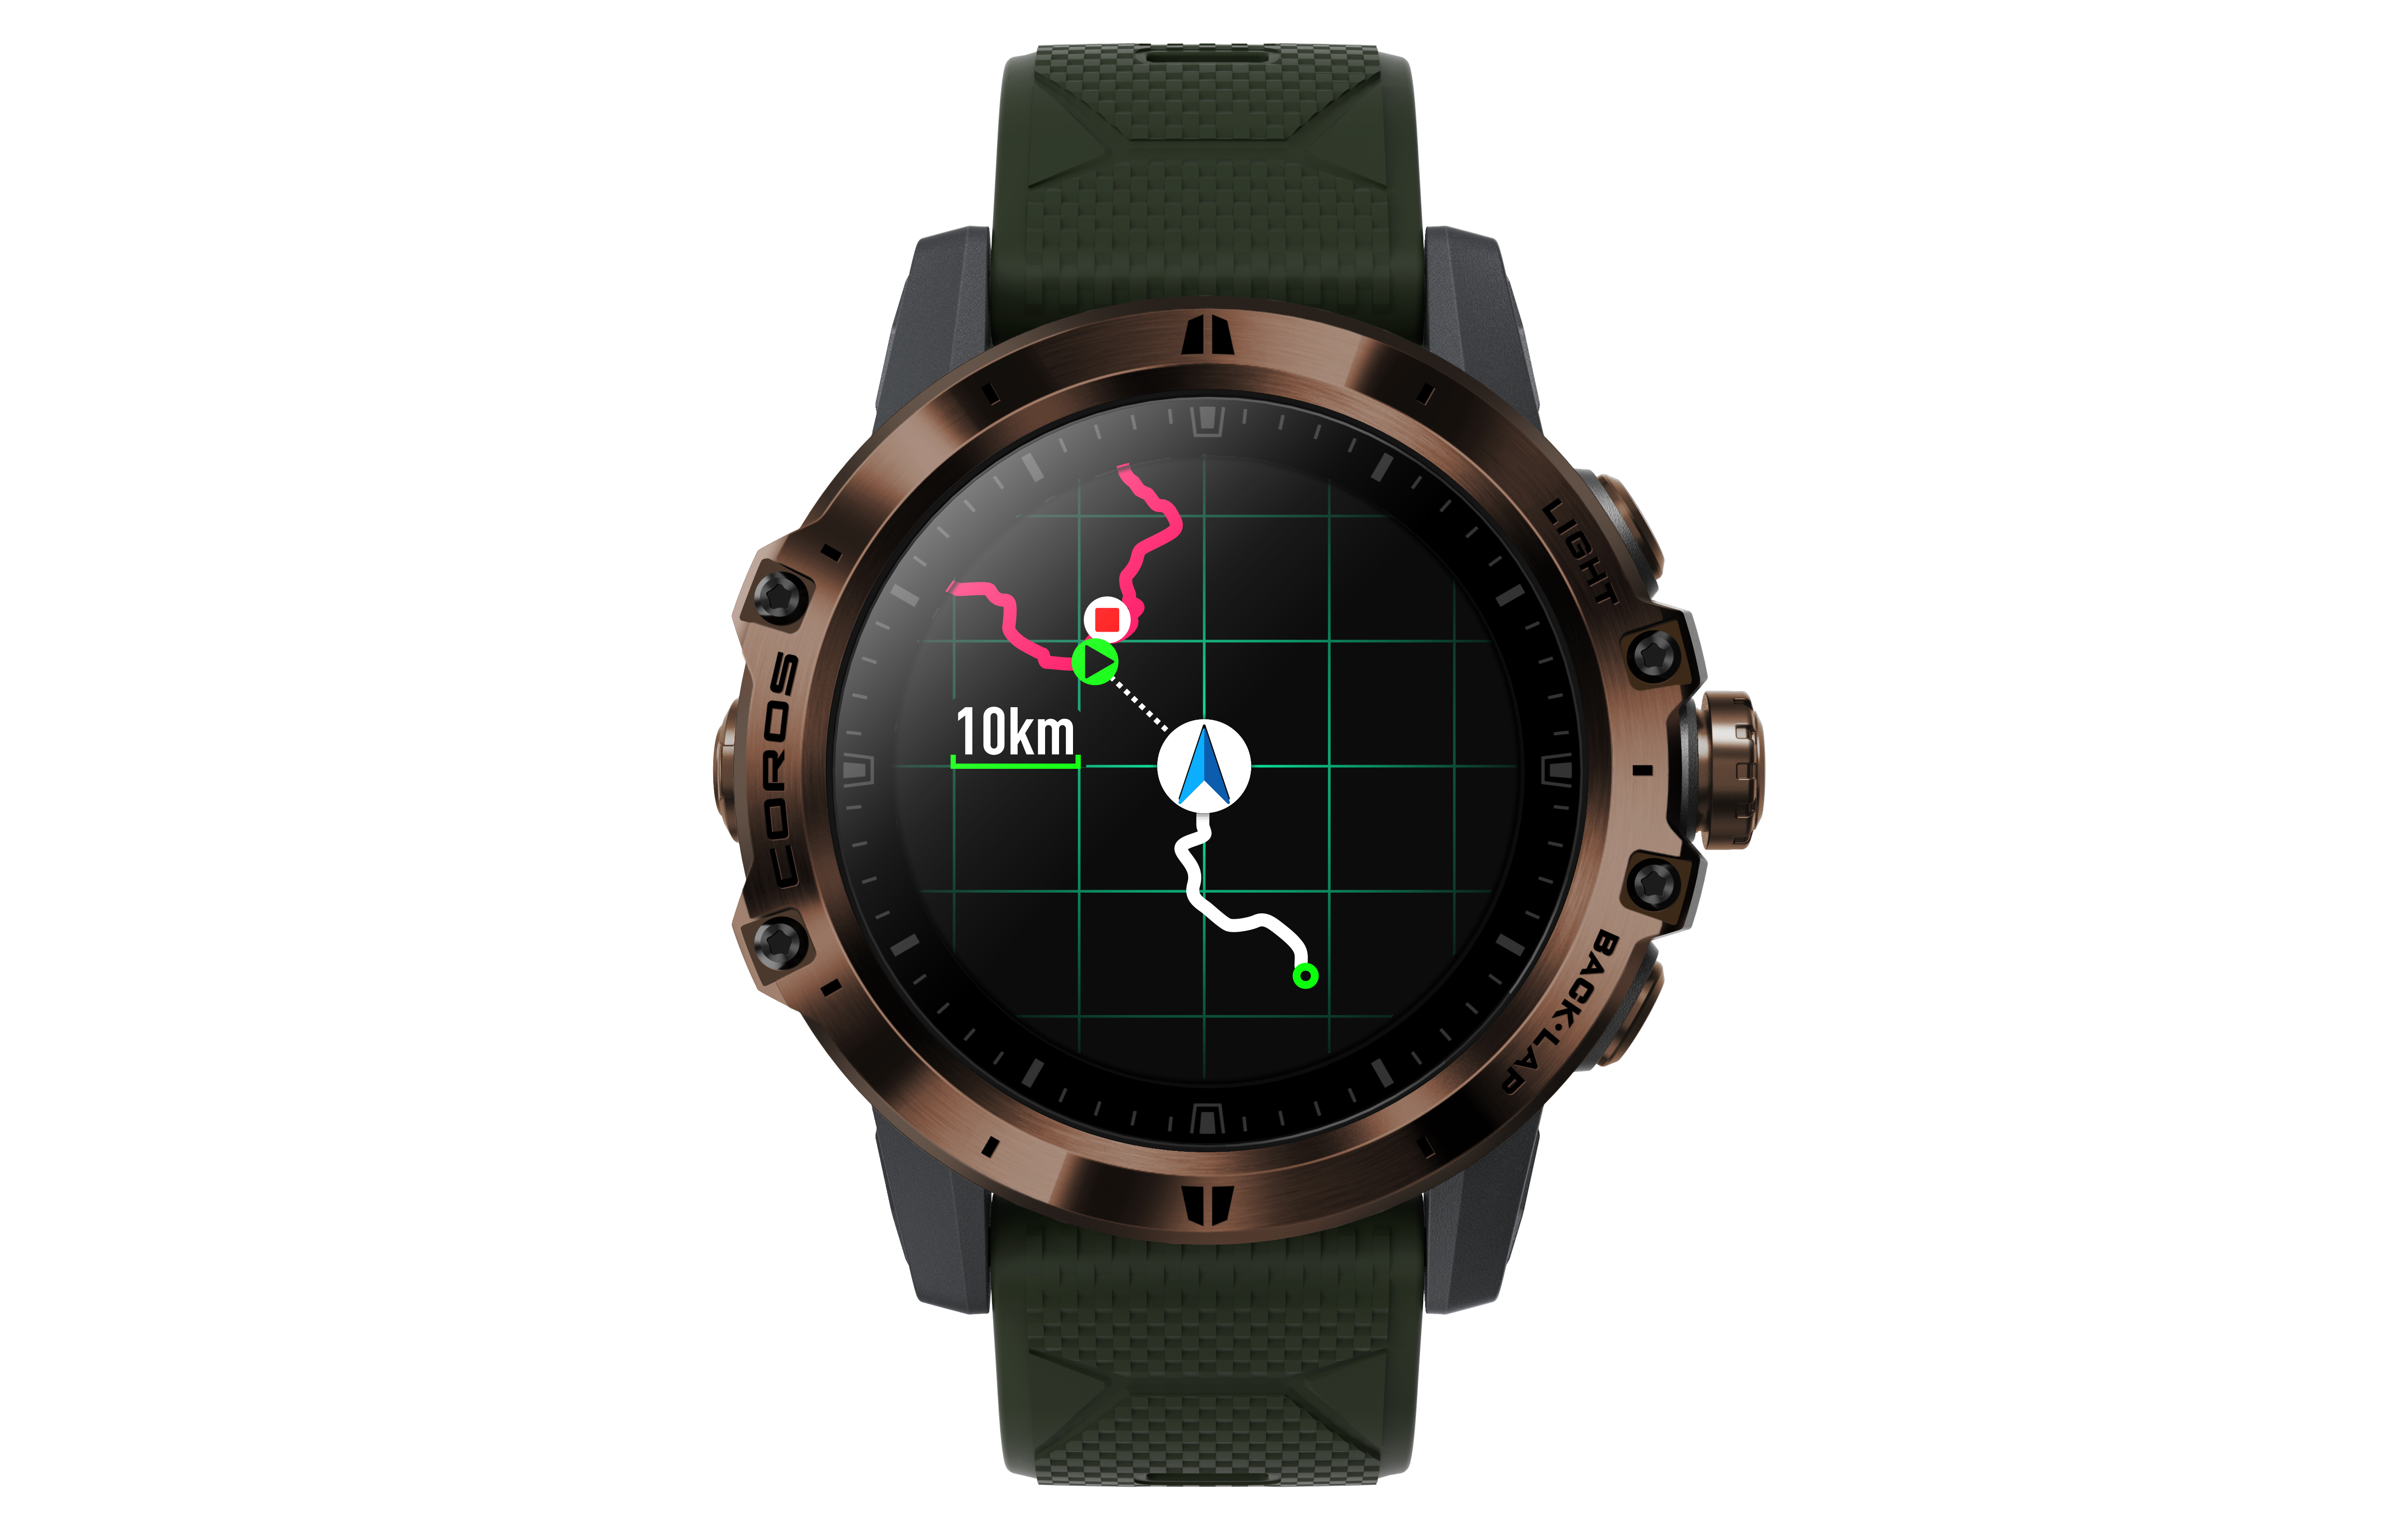 Stock_Navigation_Watch_Image.png